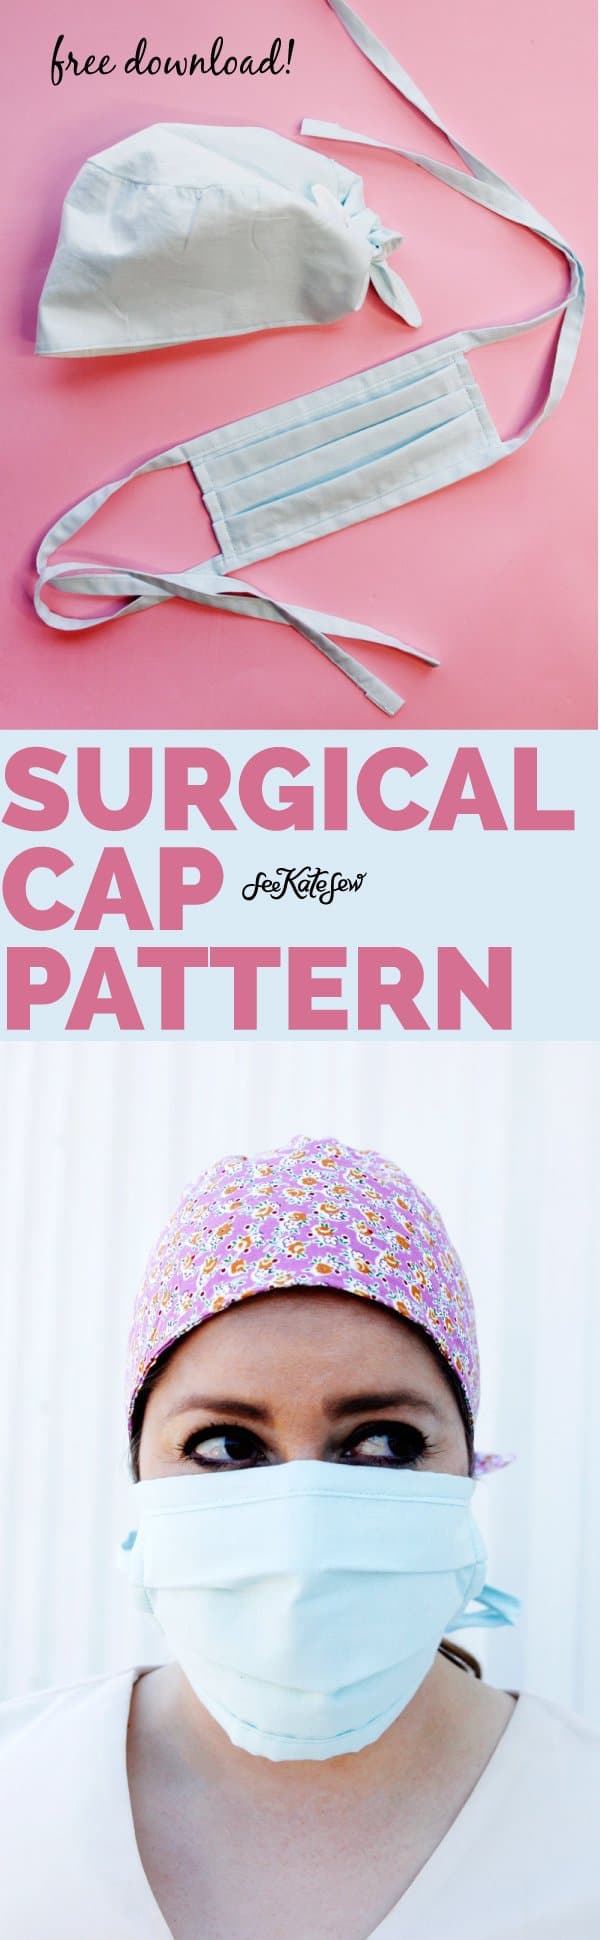 Surgical Cap Sewing Pattern FREE